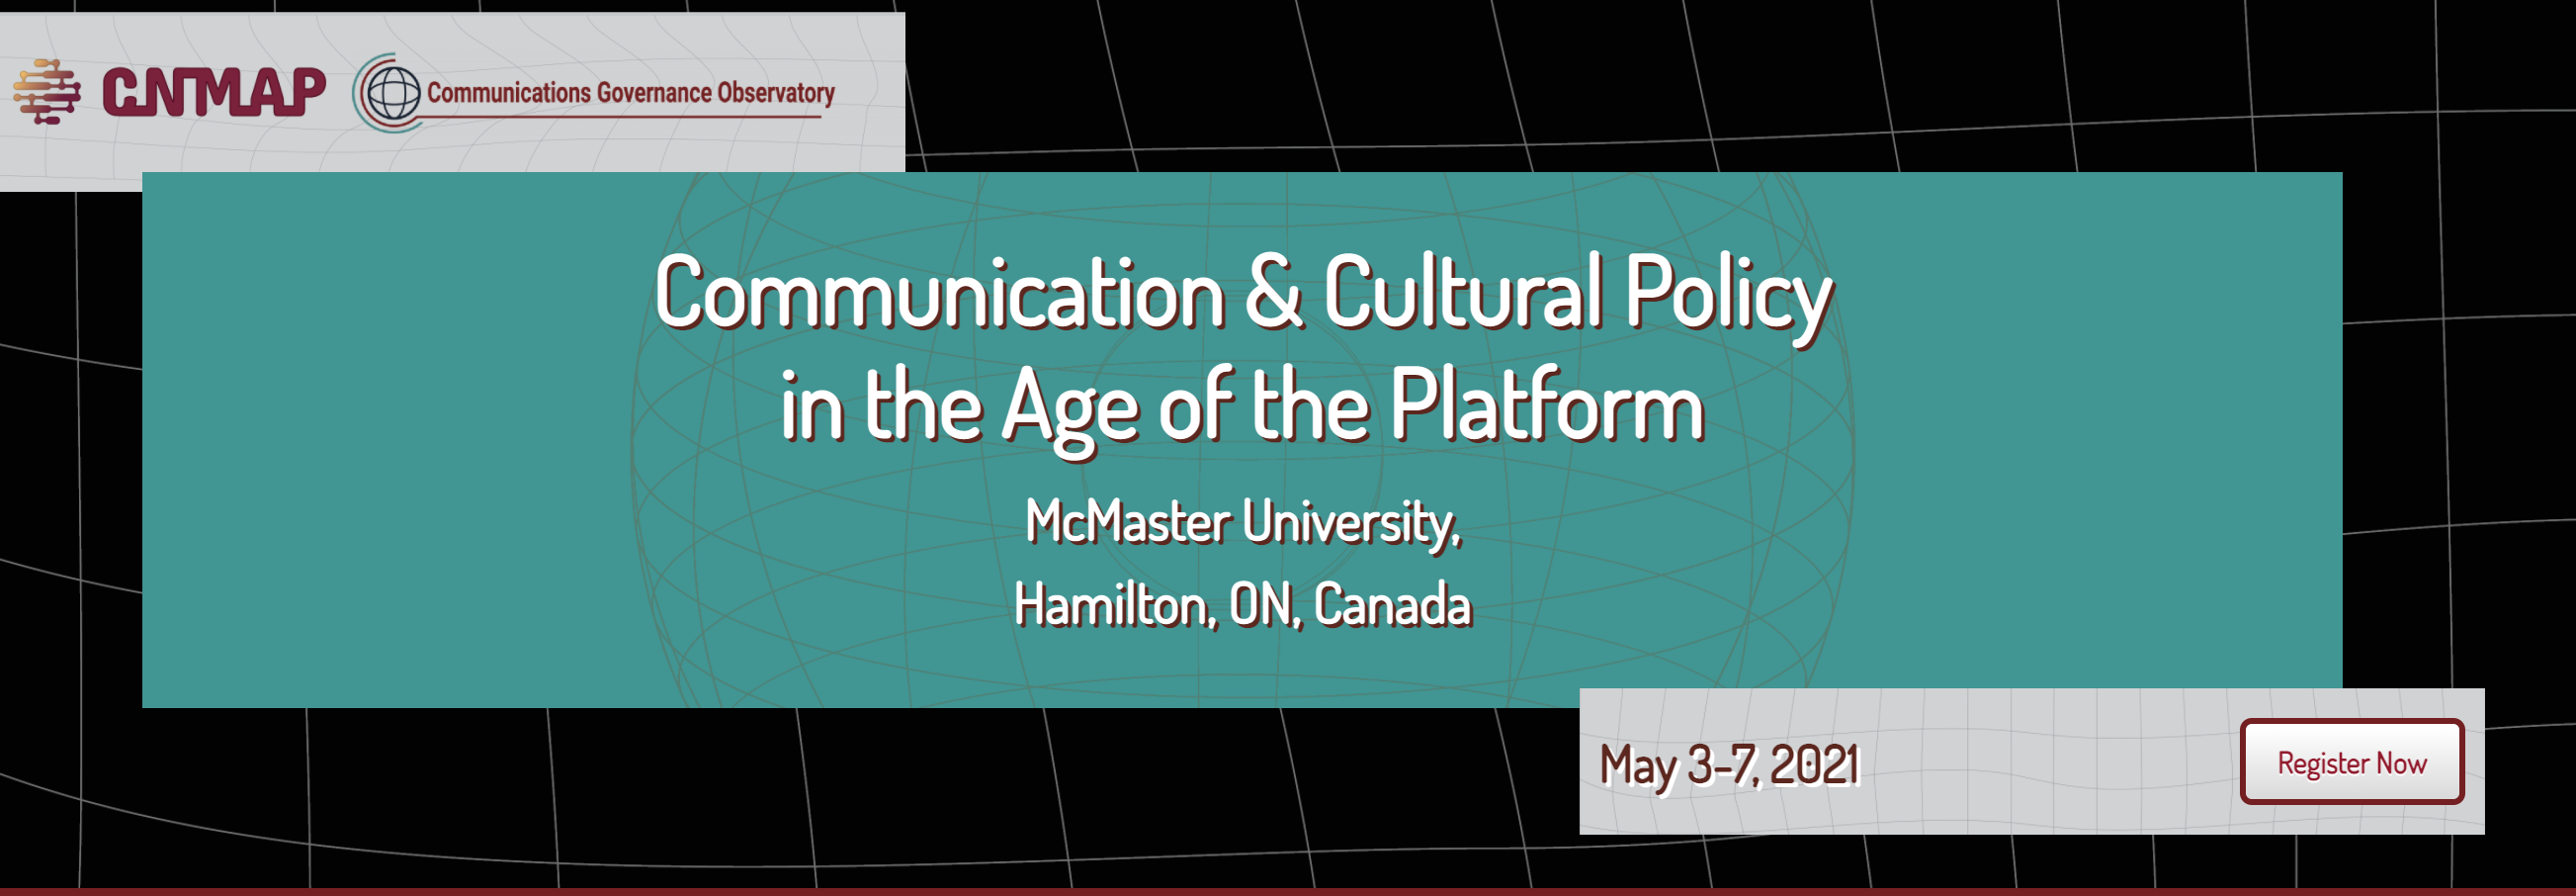 McMaster Communication & Cultural Policy in the Age of the Platform conference banner